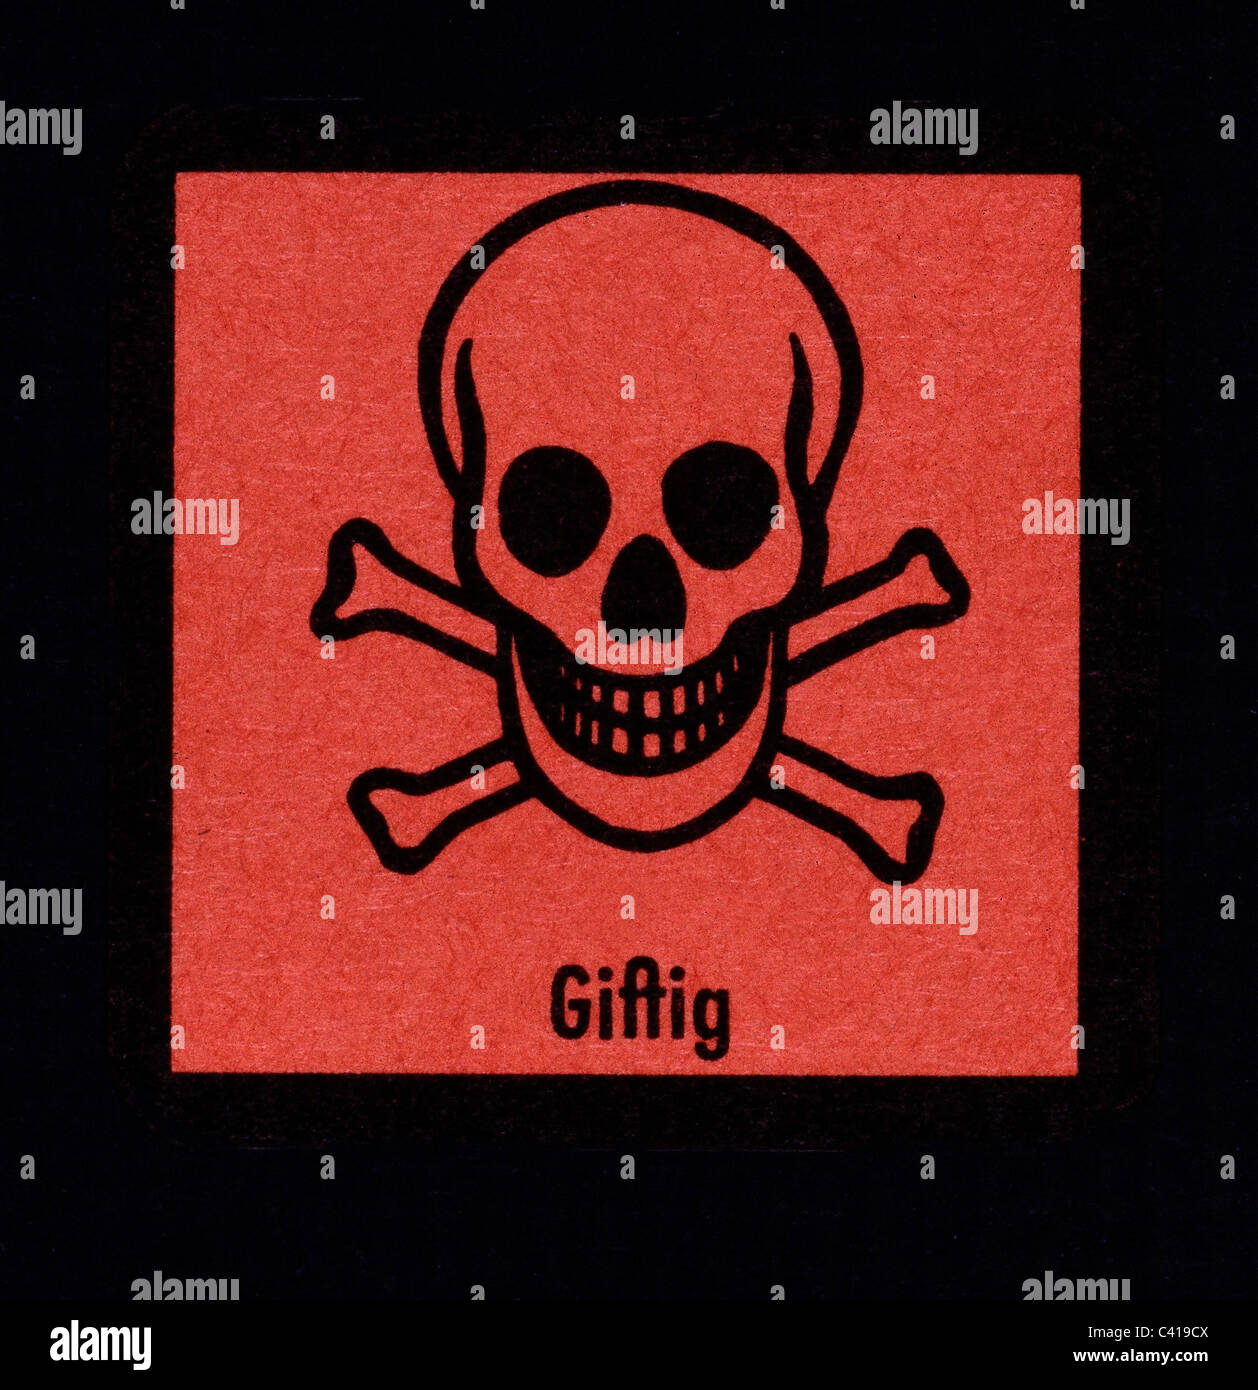 medicine, pharmacy, symbol, 'Giftig' (Toxic), orange / black, danger, dangers, clipping, cut out, cut-out, cut-outs, hazard symb Stock Photo